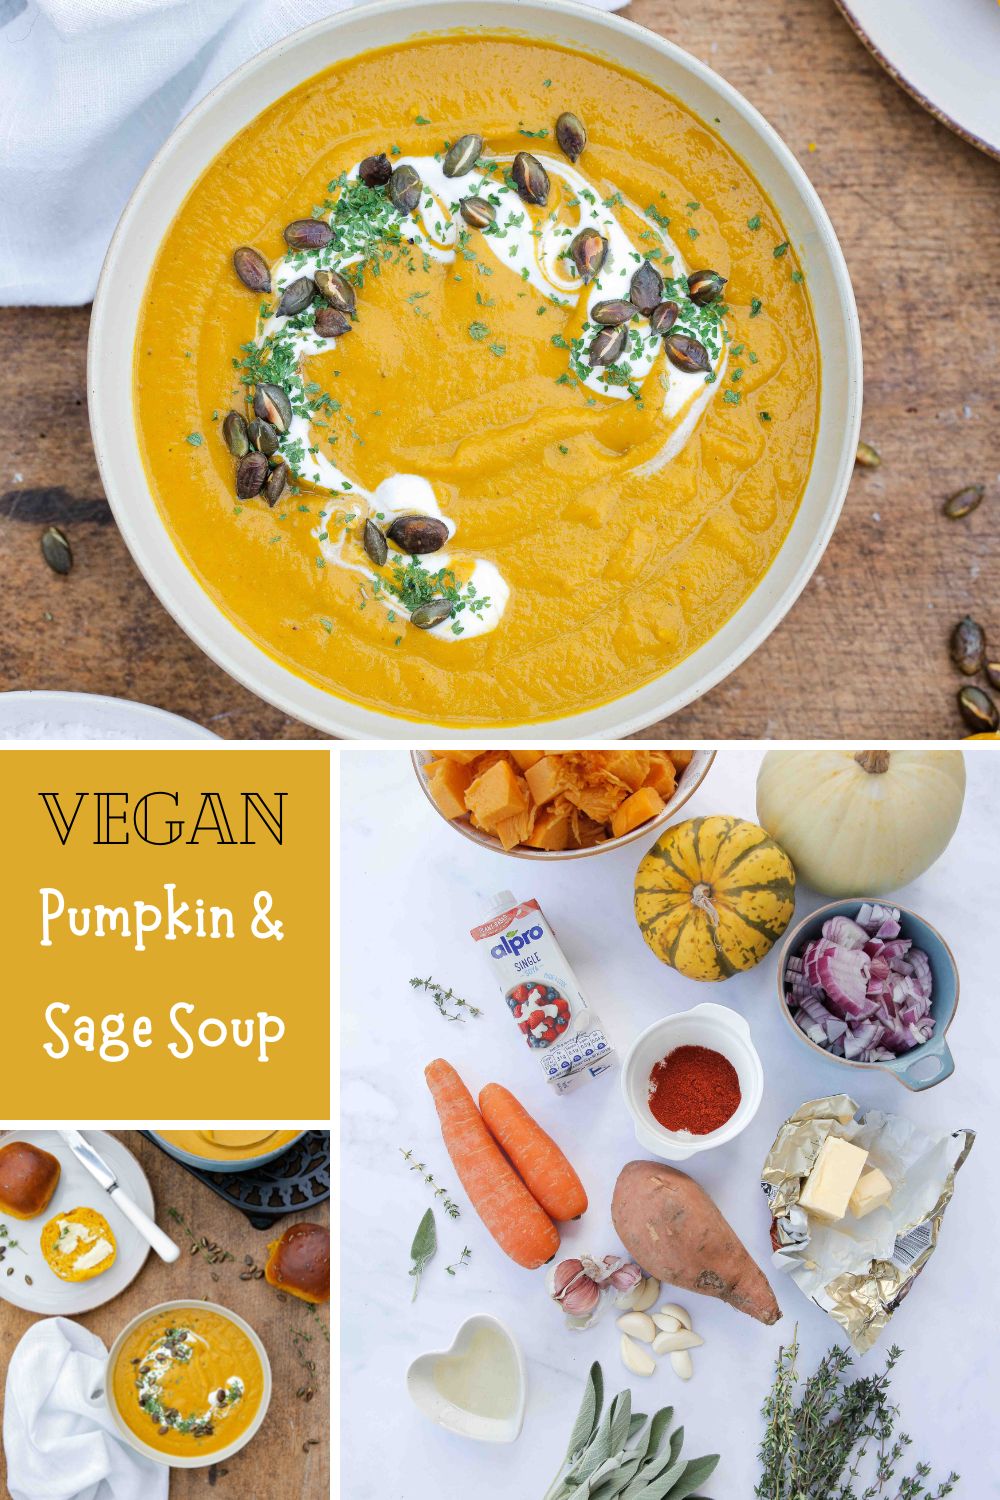 Easy to make but tastes amazing, this pumpkin soup with herbs, garlic and extra veggies is the perfect healthy bowl to warm you up during the chilly months! Recipe on thecookandhim.com #pumpkinsoup #pumpkinrecipes #autumnrecipes #winterwarmerrecipes #prepaheadmeals #fallrecipes